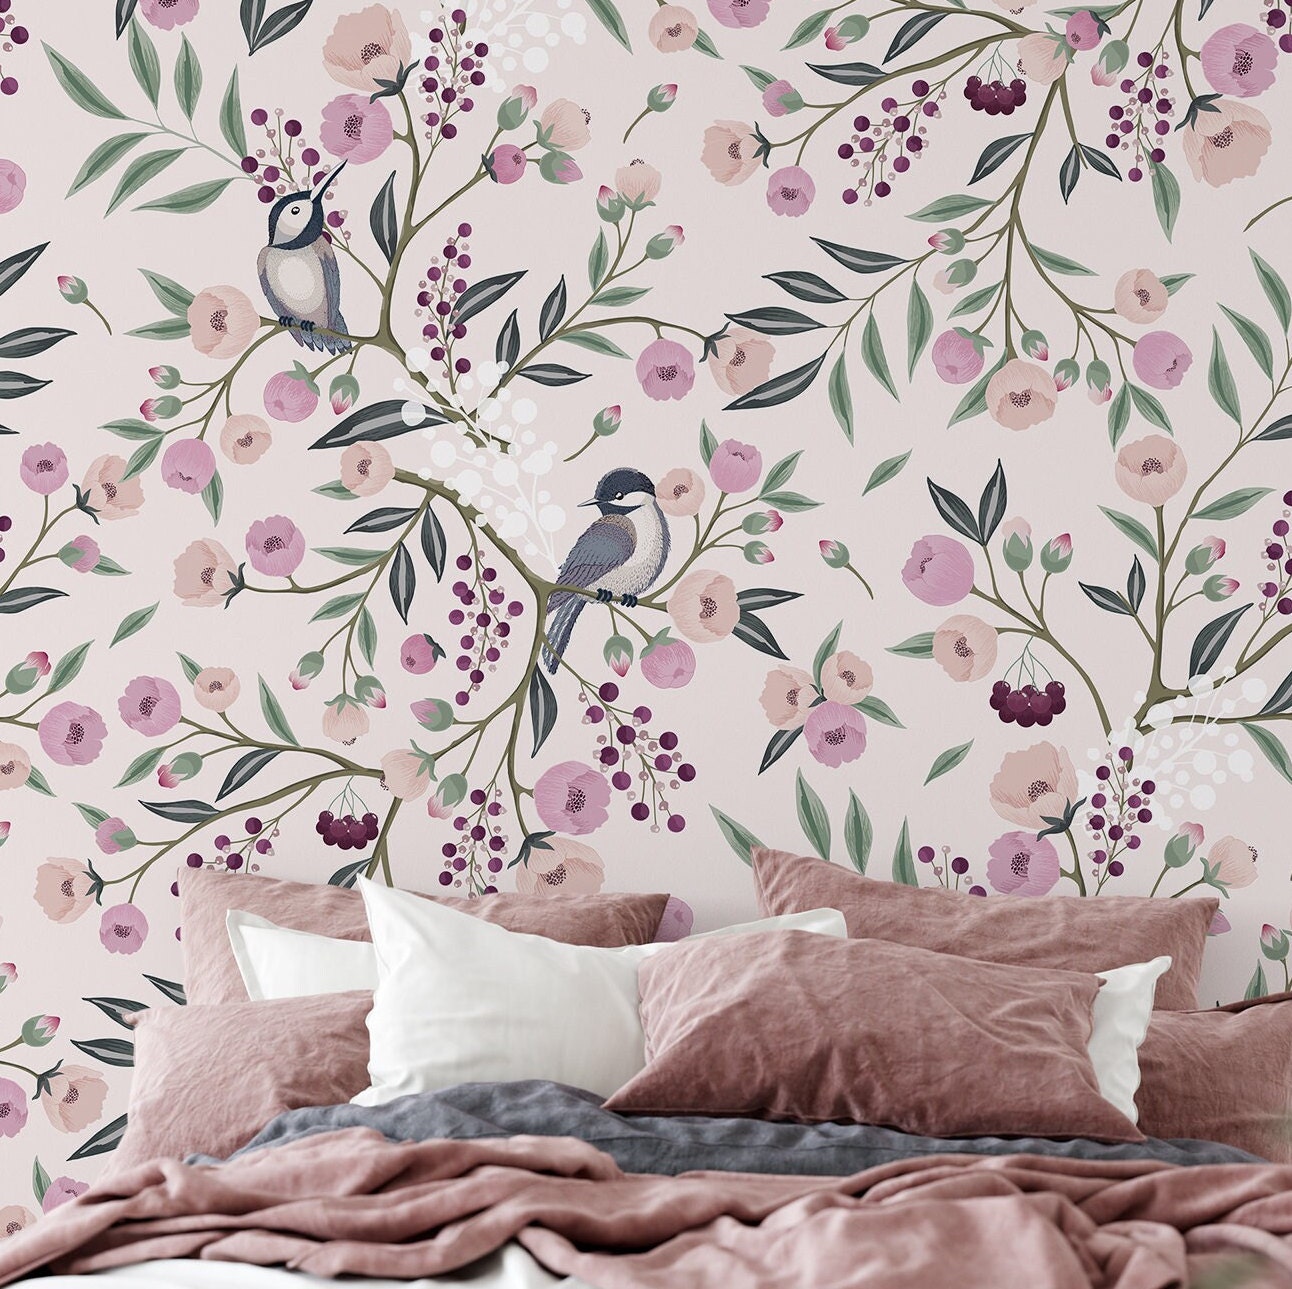 Walls Republic Dreamy Vintage Birds Black Floral Paper Non-Pasted Strippable Wallpaper Roll (Covers 57 Sq. ft.)